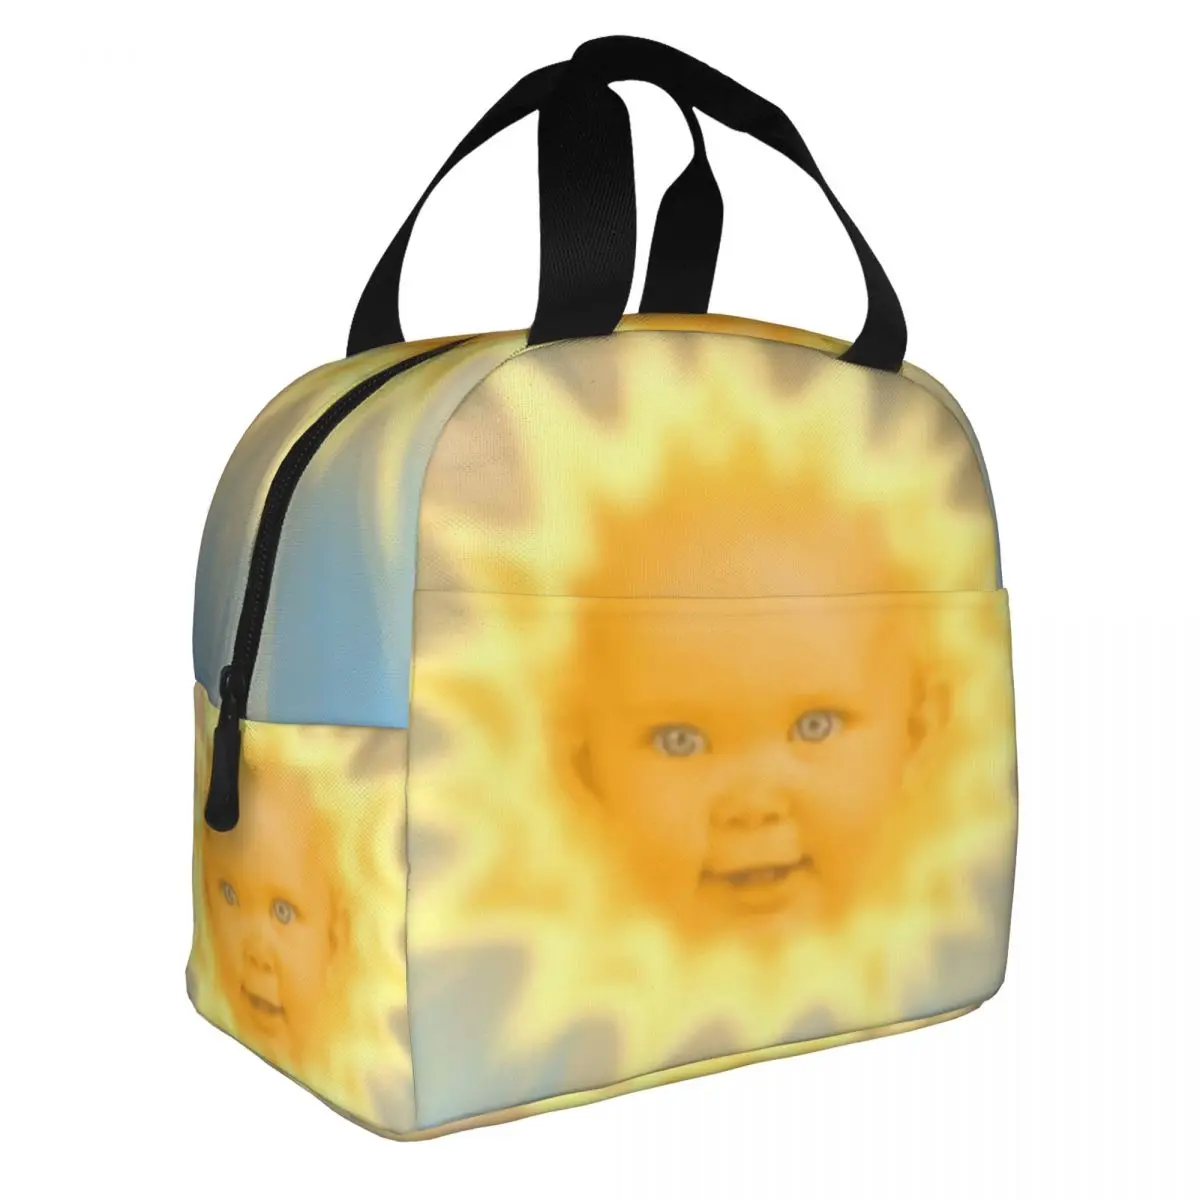 Teletubbies' Sun Baby Lunch Bento Bags Portable Aluminum Foil thickened Thermal Cloth Lunch Bag for Women Men Boy